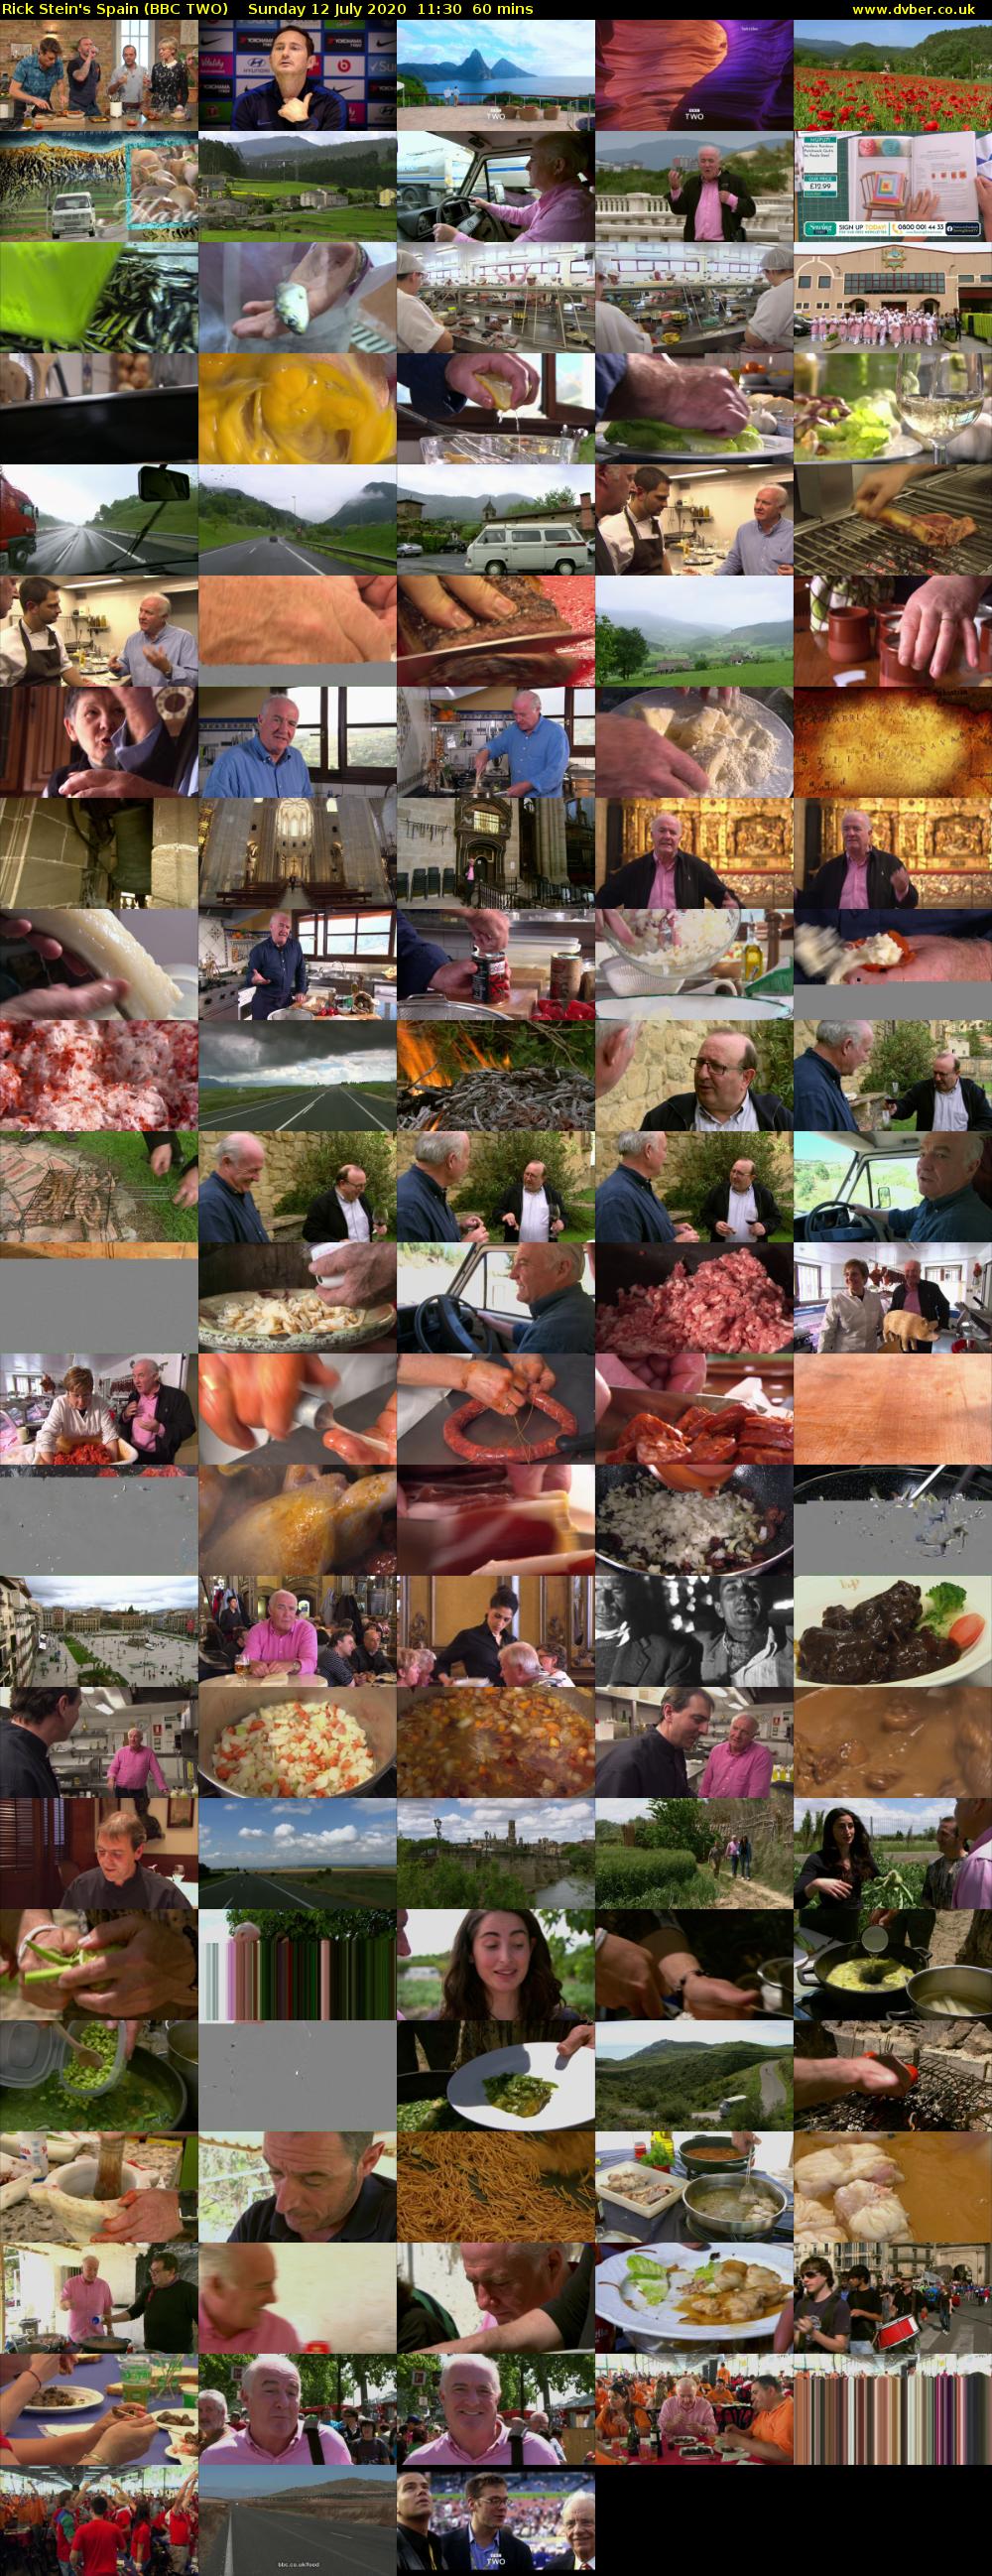 Rick Stein's Spain (BBC TWO) Sunday 12 July 2020 11:30 - 12:30